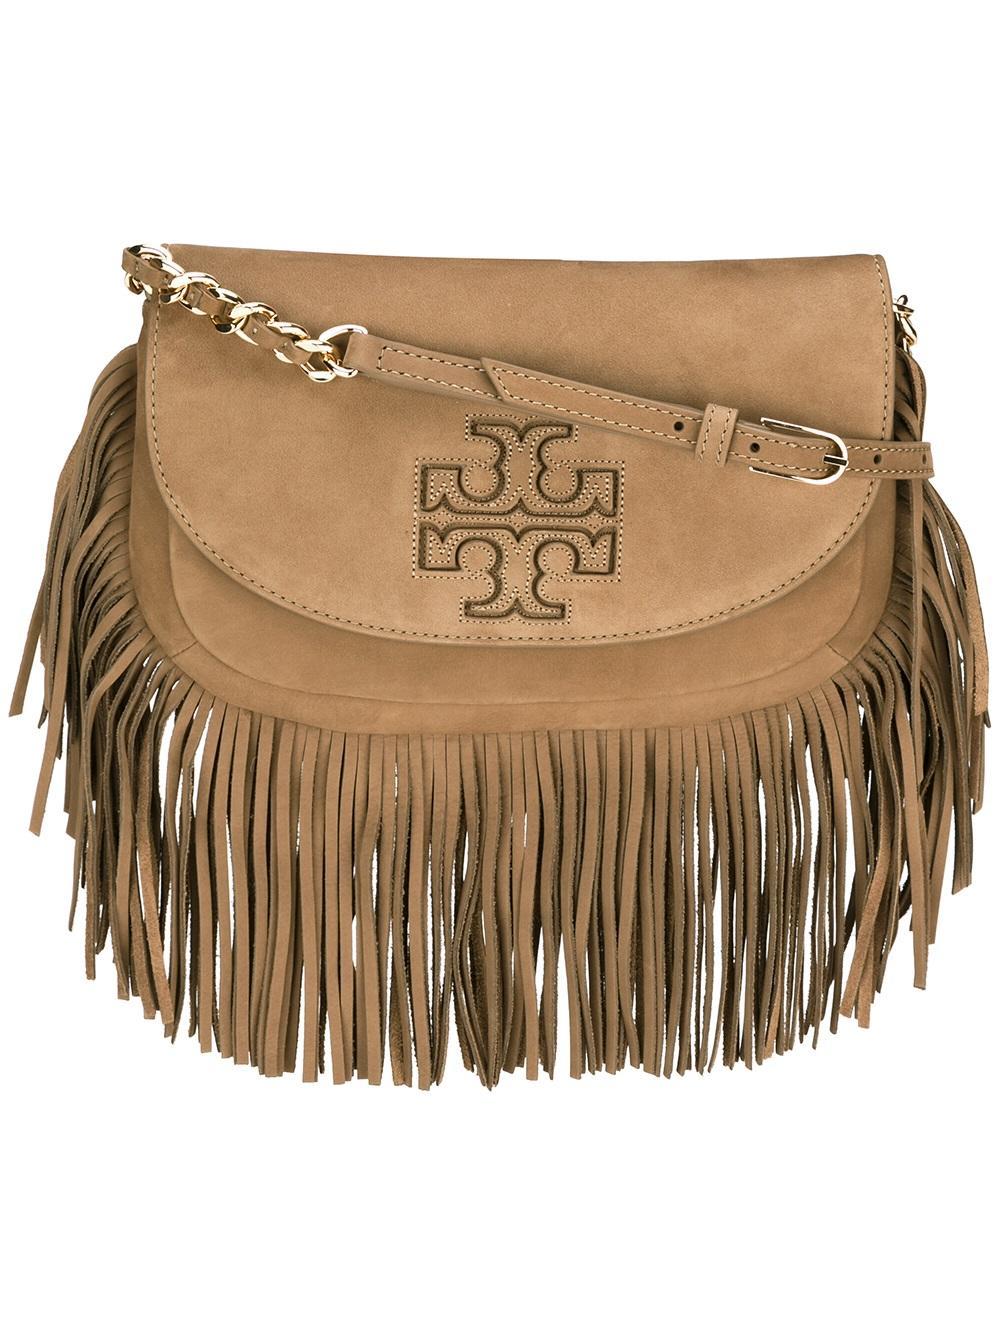 Tory Burch Thea Leather Fringe Crossbody Bag in Brown